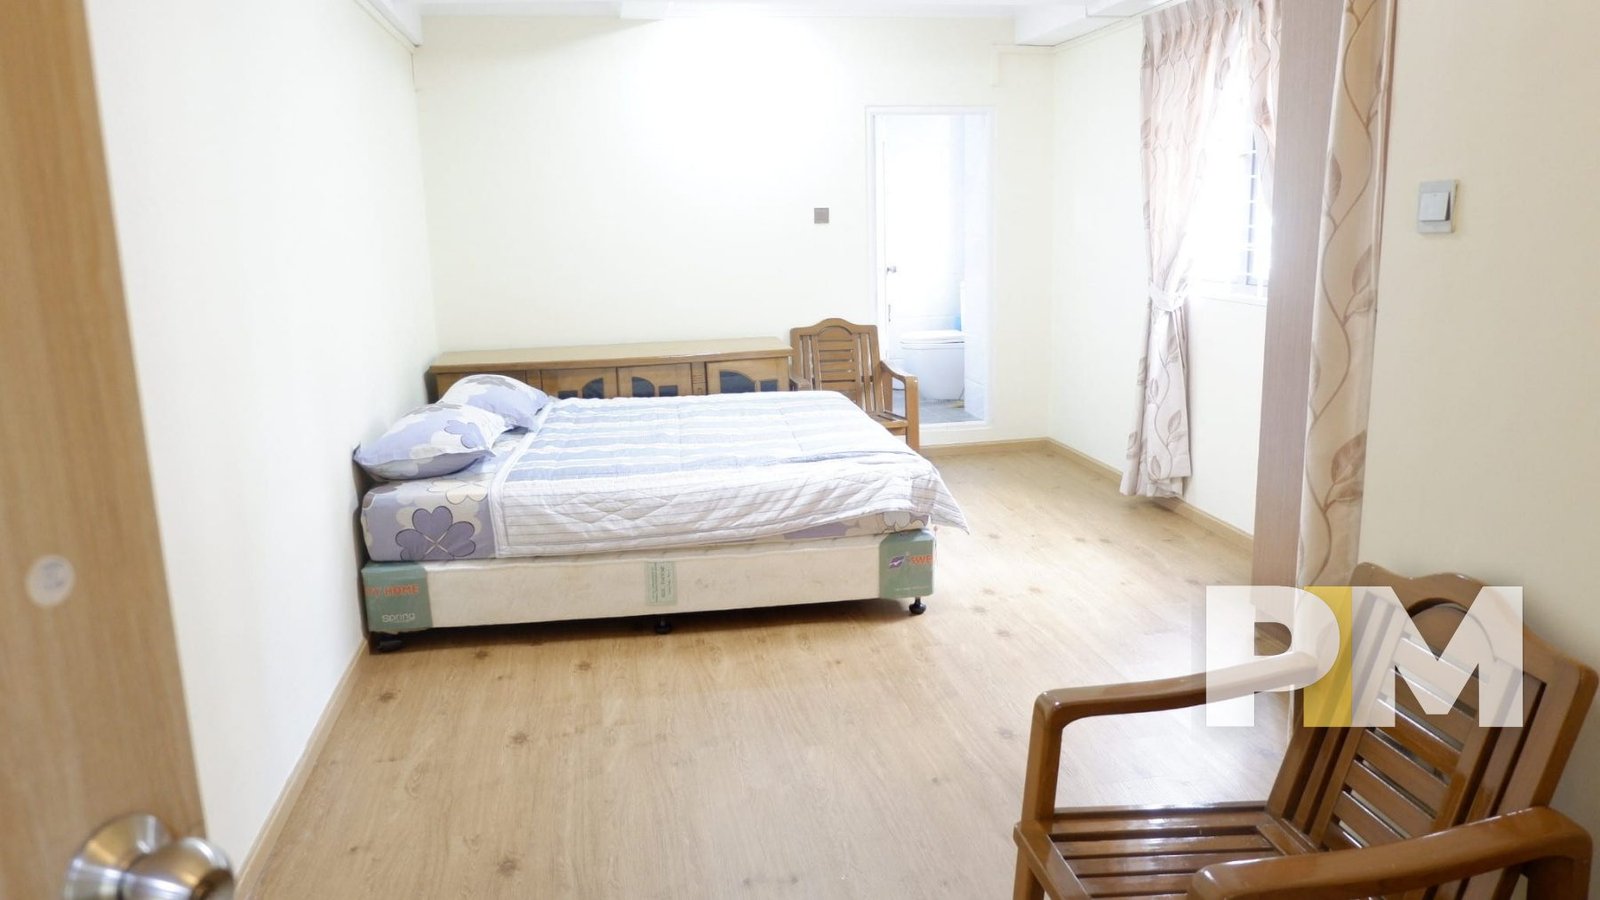 Apartment in sanchaung for rent